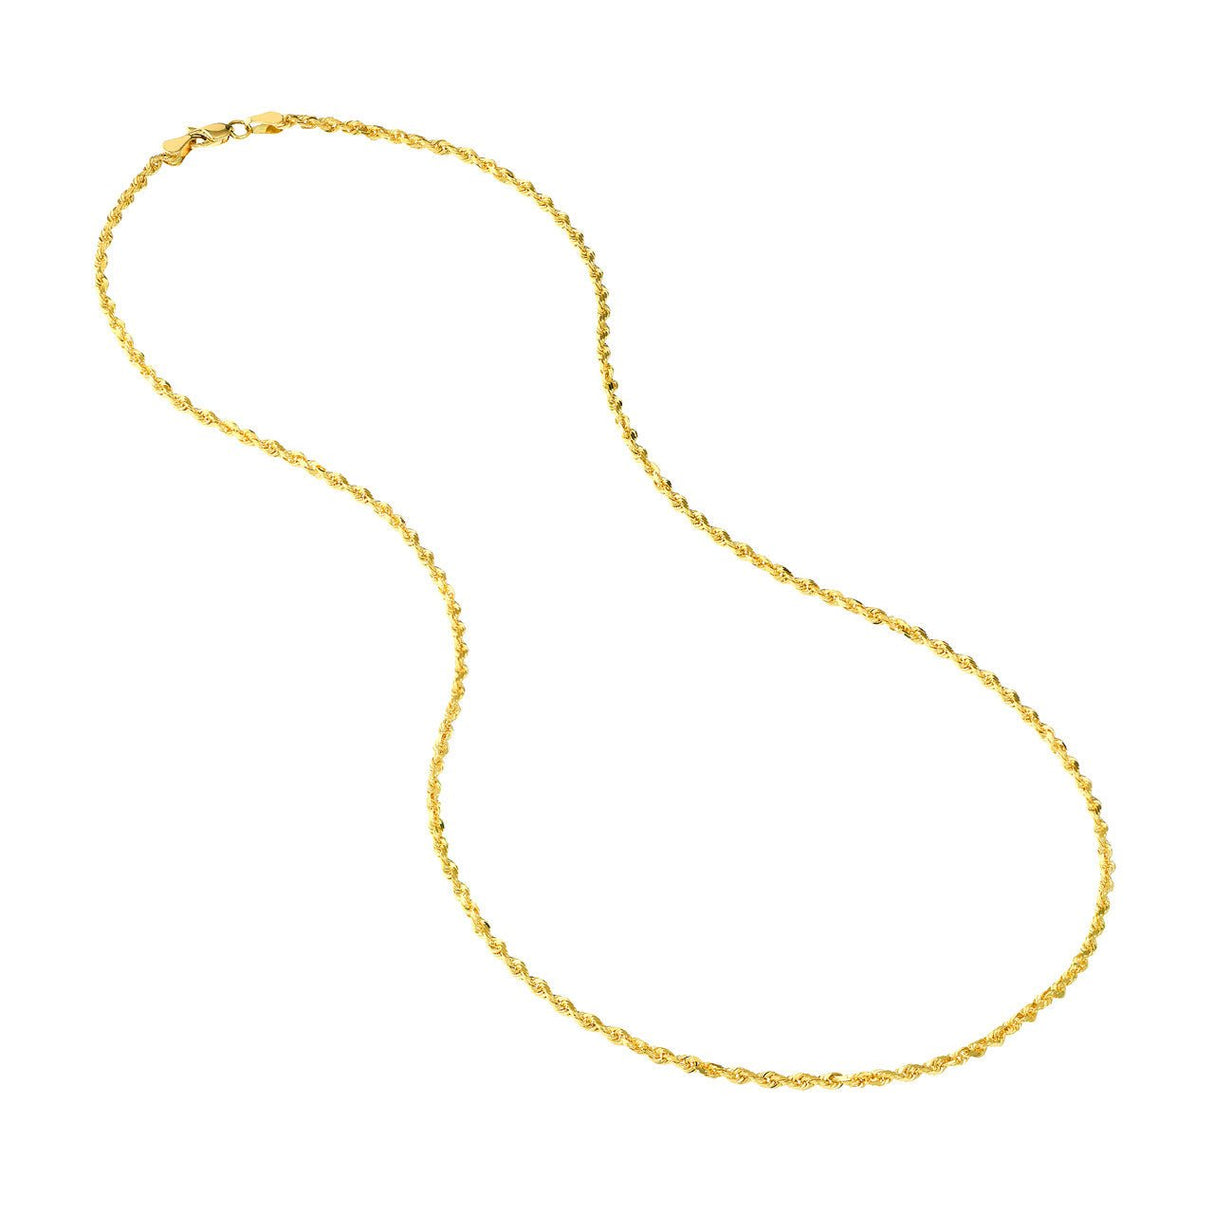 14K Gold Chain, 16", 2.15mm D/C Rope Chain with Lobster Lock, Gold Layered Chain, Gold Chain Necklace, - Diamond Origin